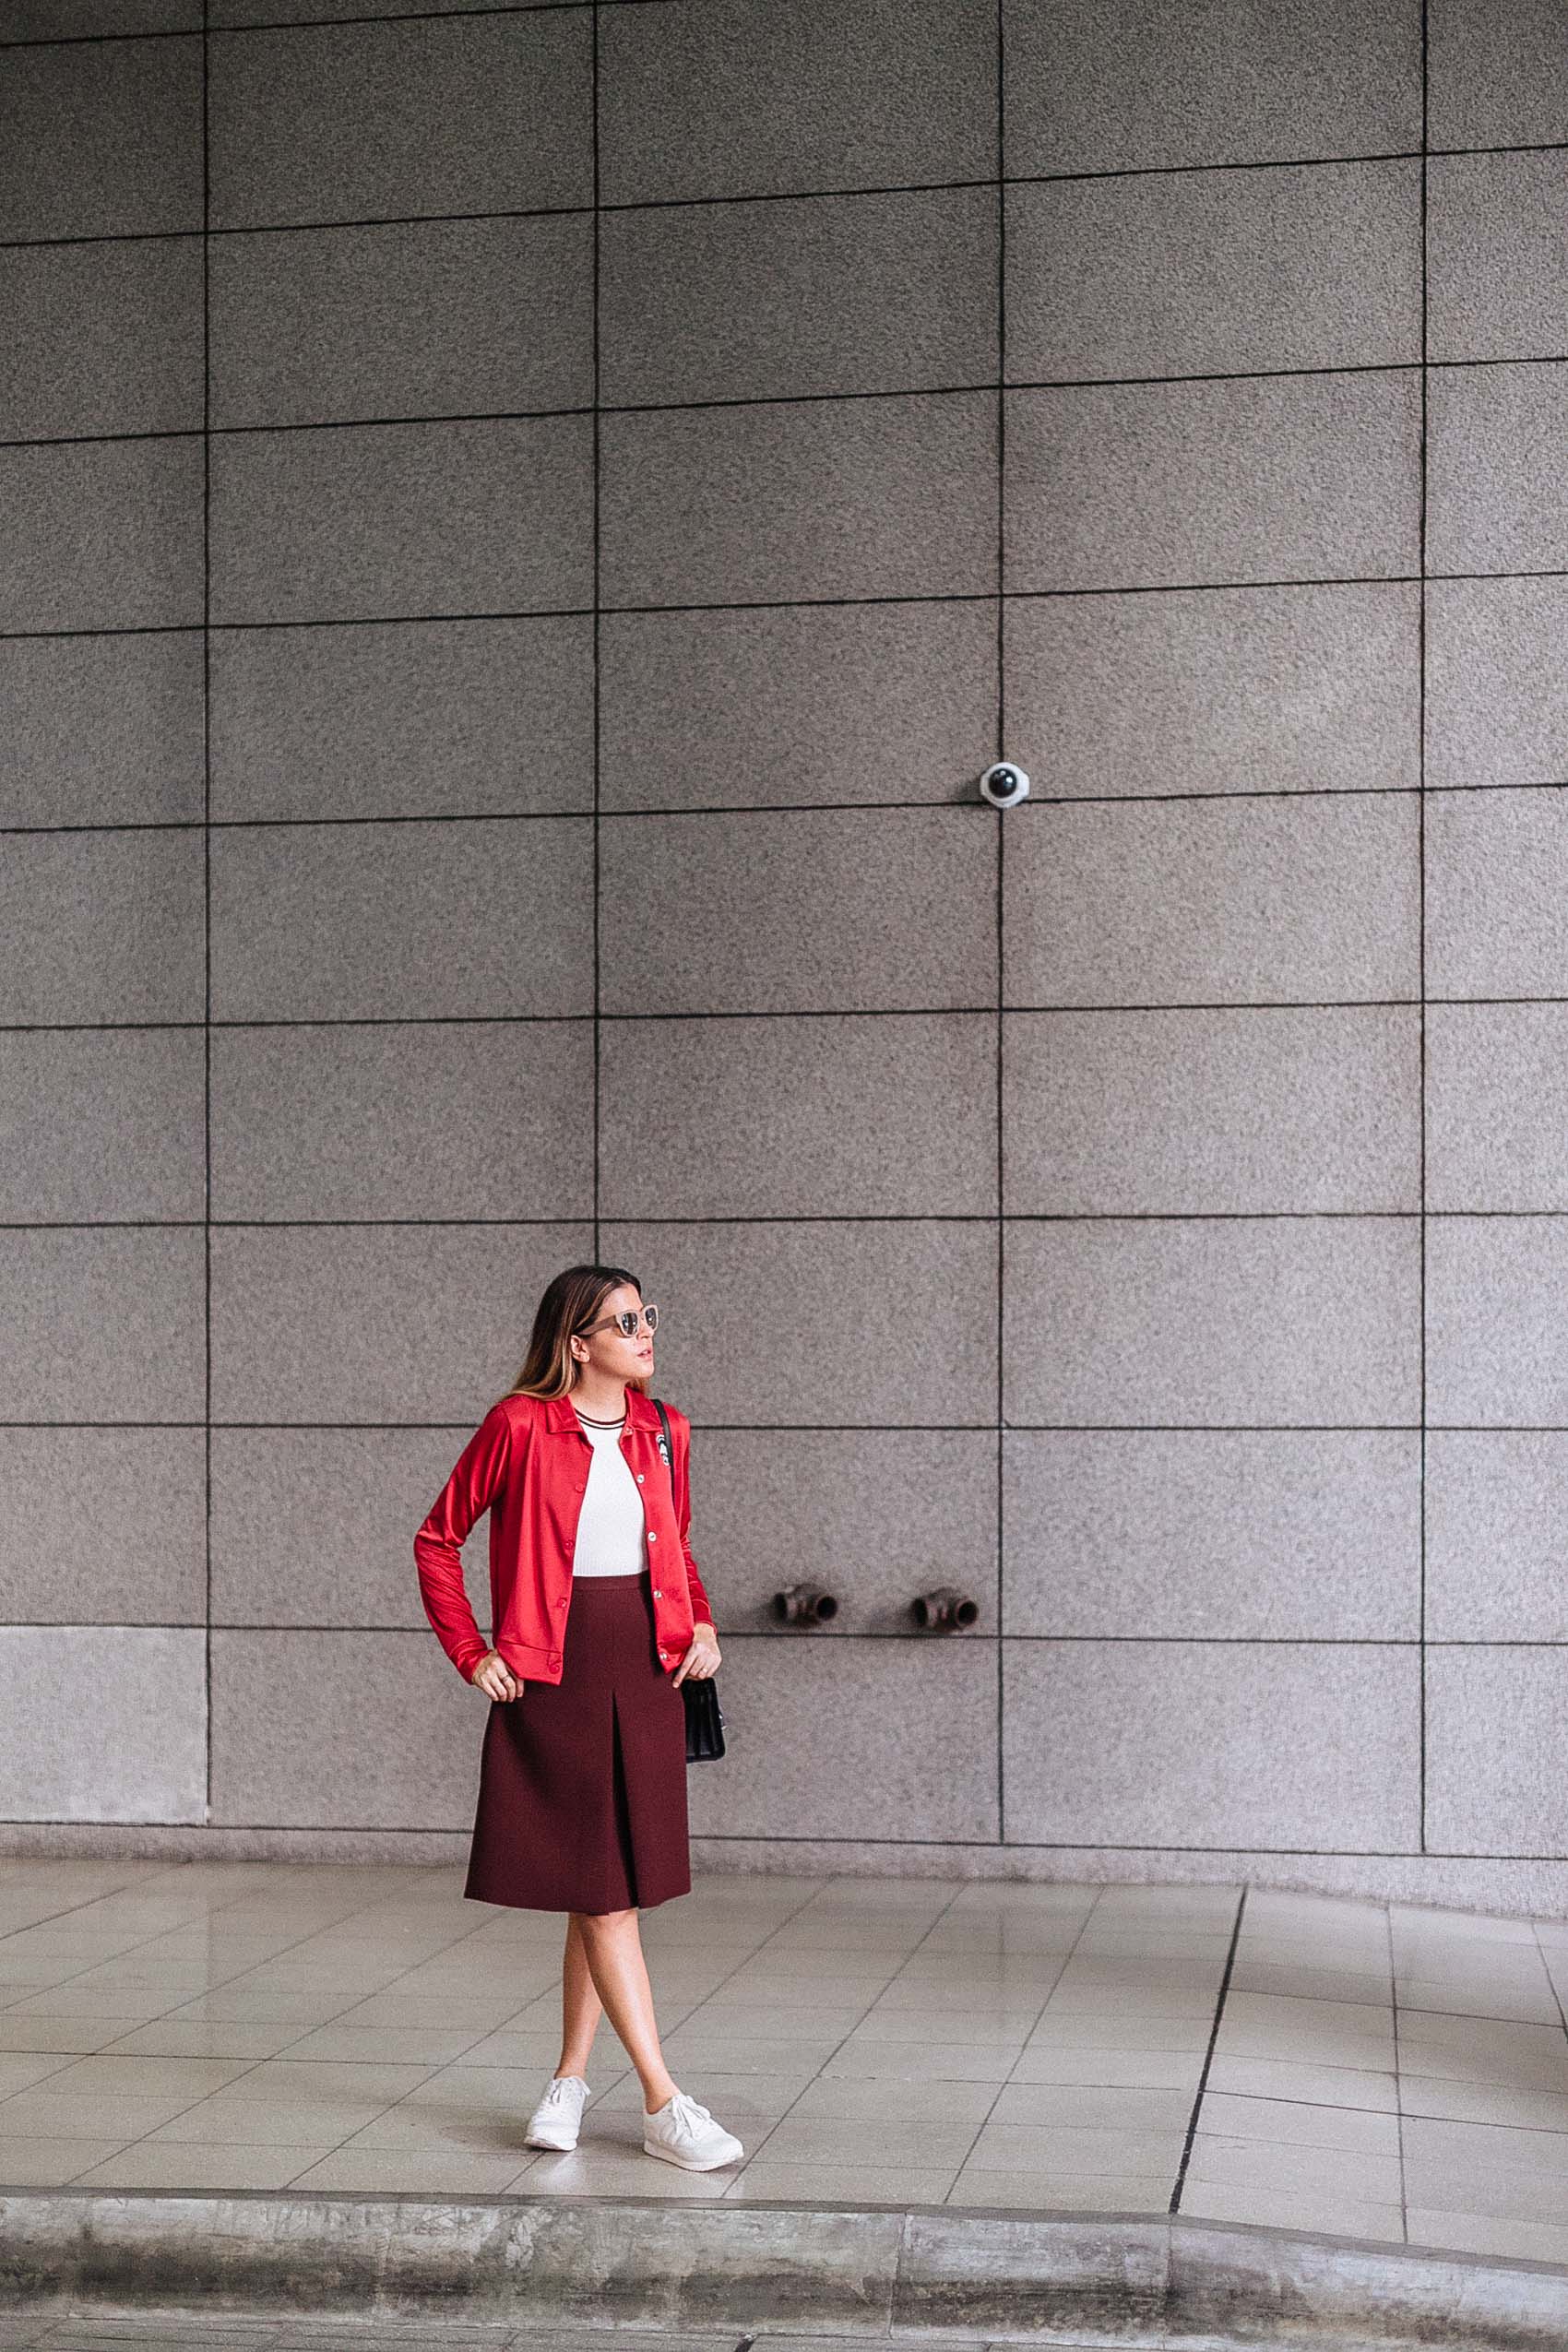 Maristella wears a red bomber jacker, ribbed ringer top from H&M, structured dark red A line skirt from H&M, sneakers from Zara and bag from Yves Saint Laurent